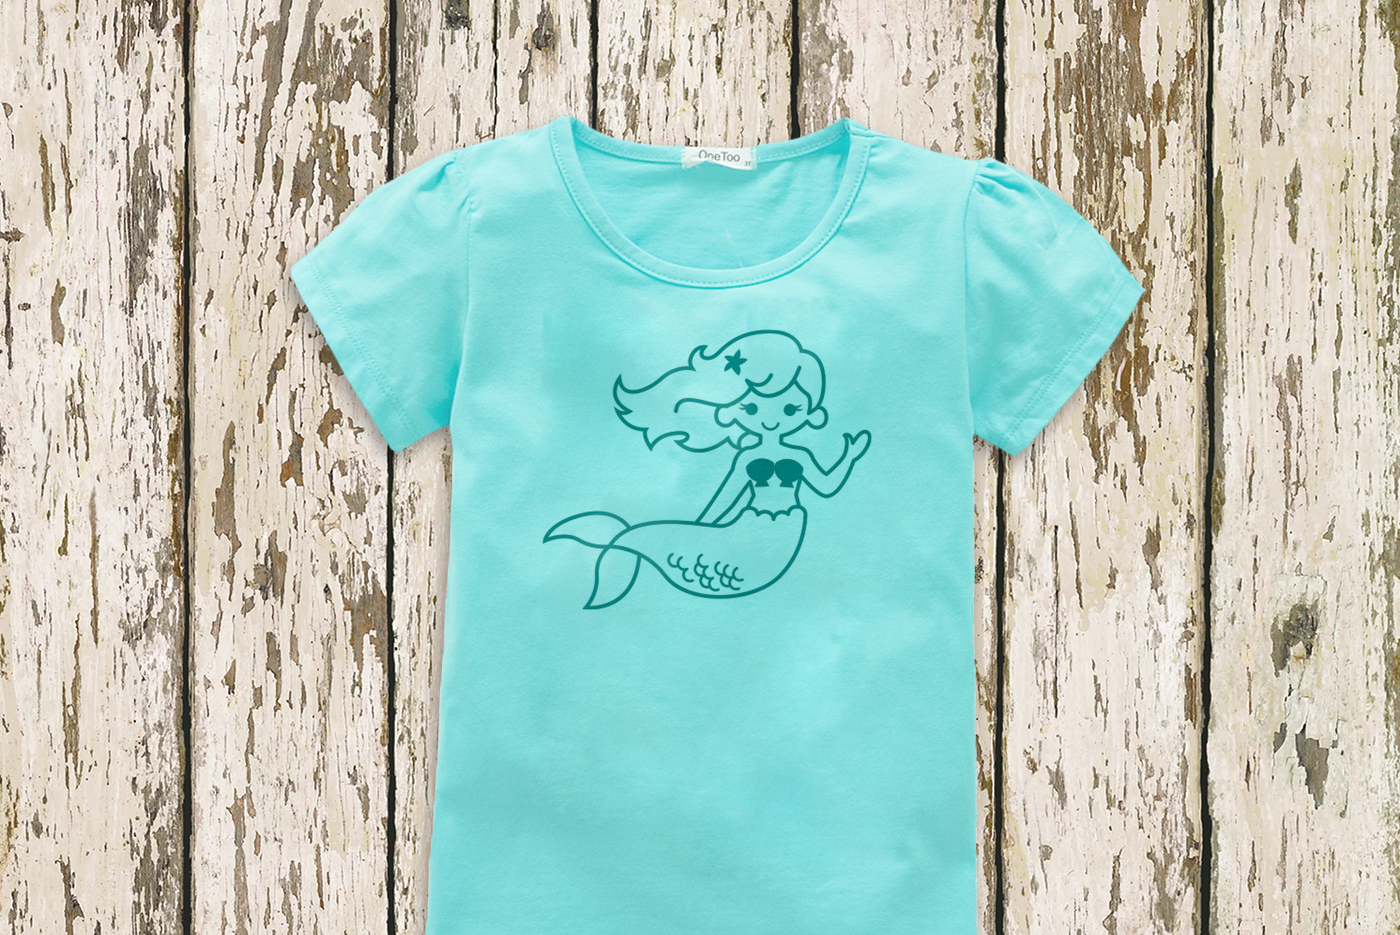 An aqua tee with a waving mermaid done in turquoise.